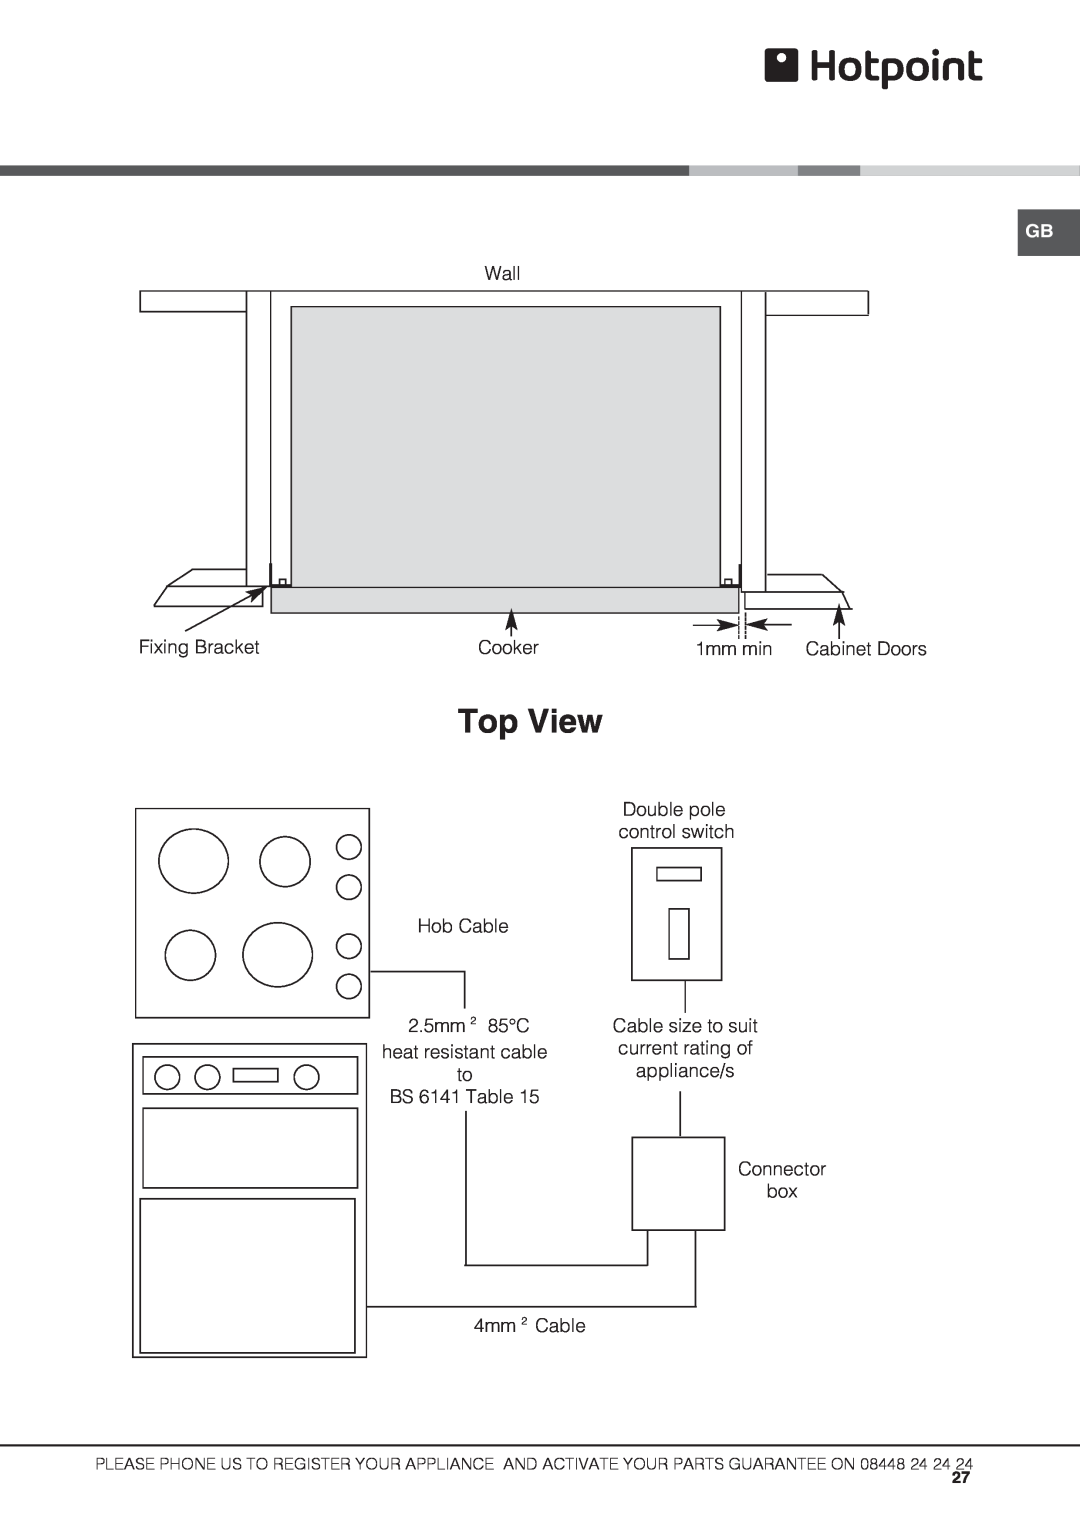 Hotpoint UBS 537 CX S Top View, Wall, Fixing Bracket, Cooker, 1mm min, Double pole control switch Hob Cable, 2.5mm 2 85C 